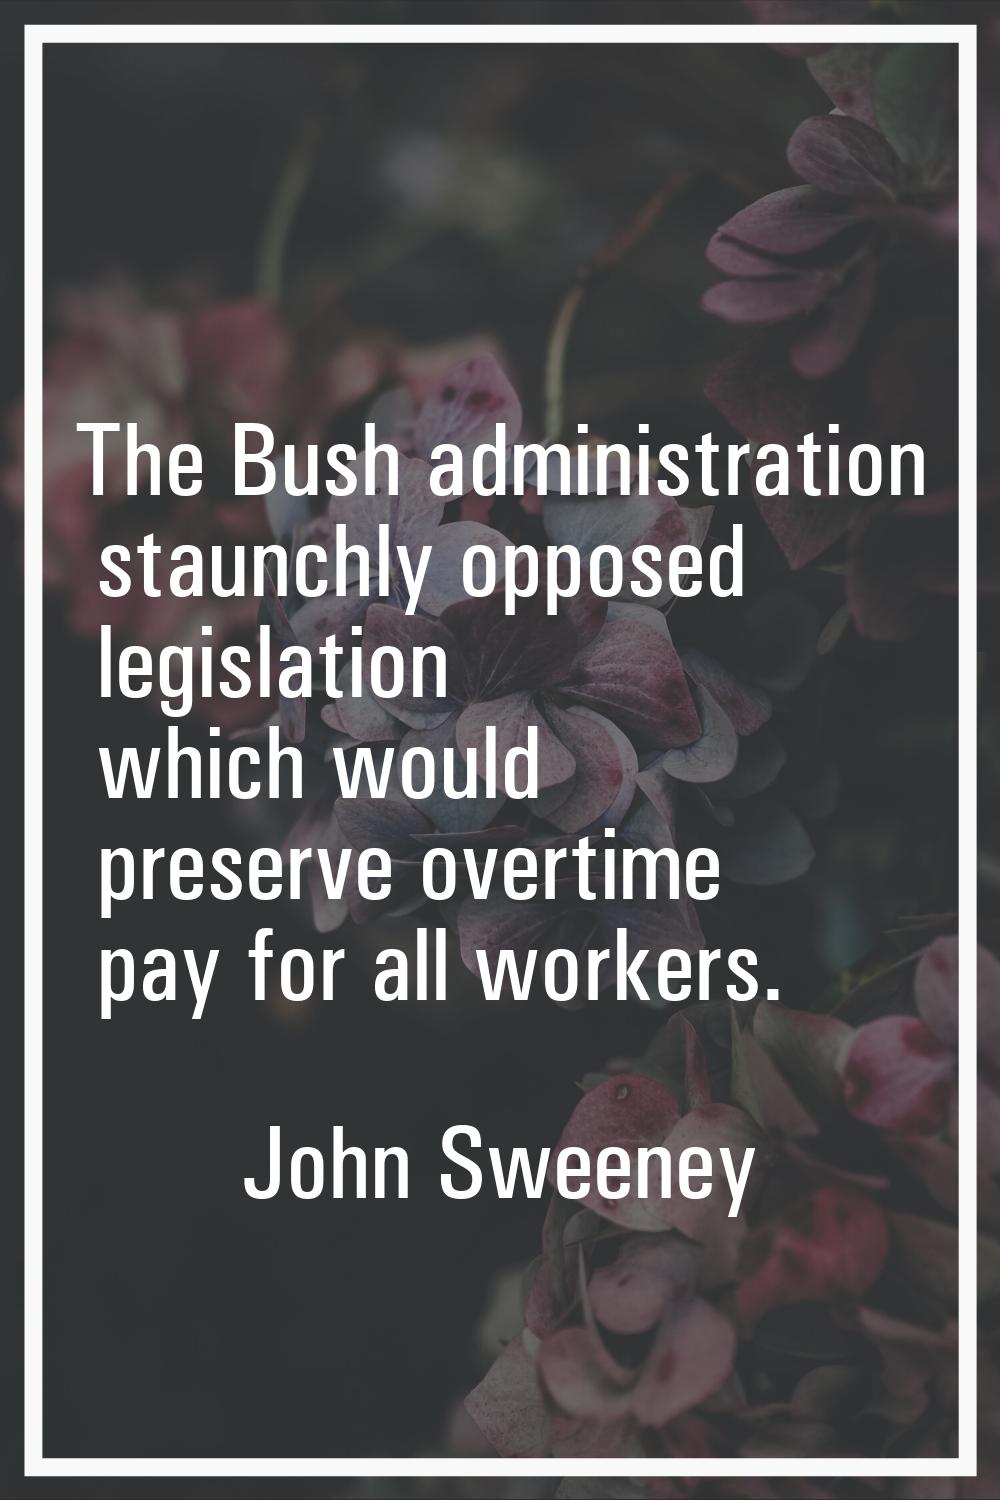 The Bush administration staunchly opposed legislation which would preserve overtime pay for all wor